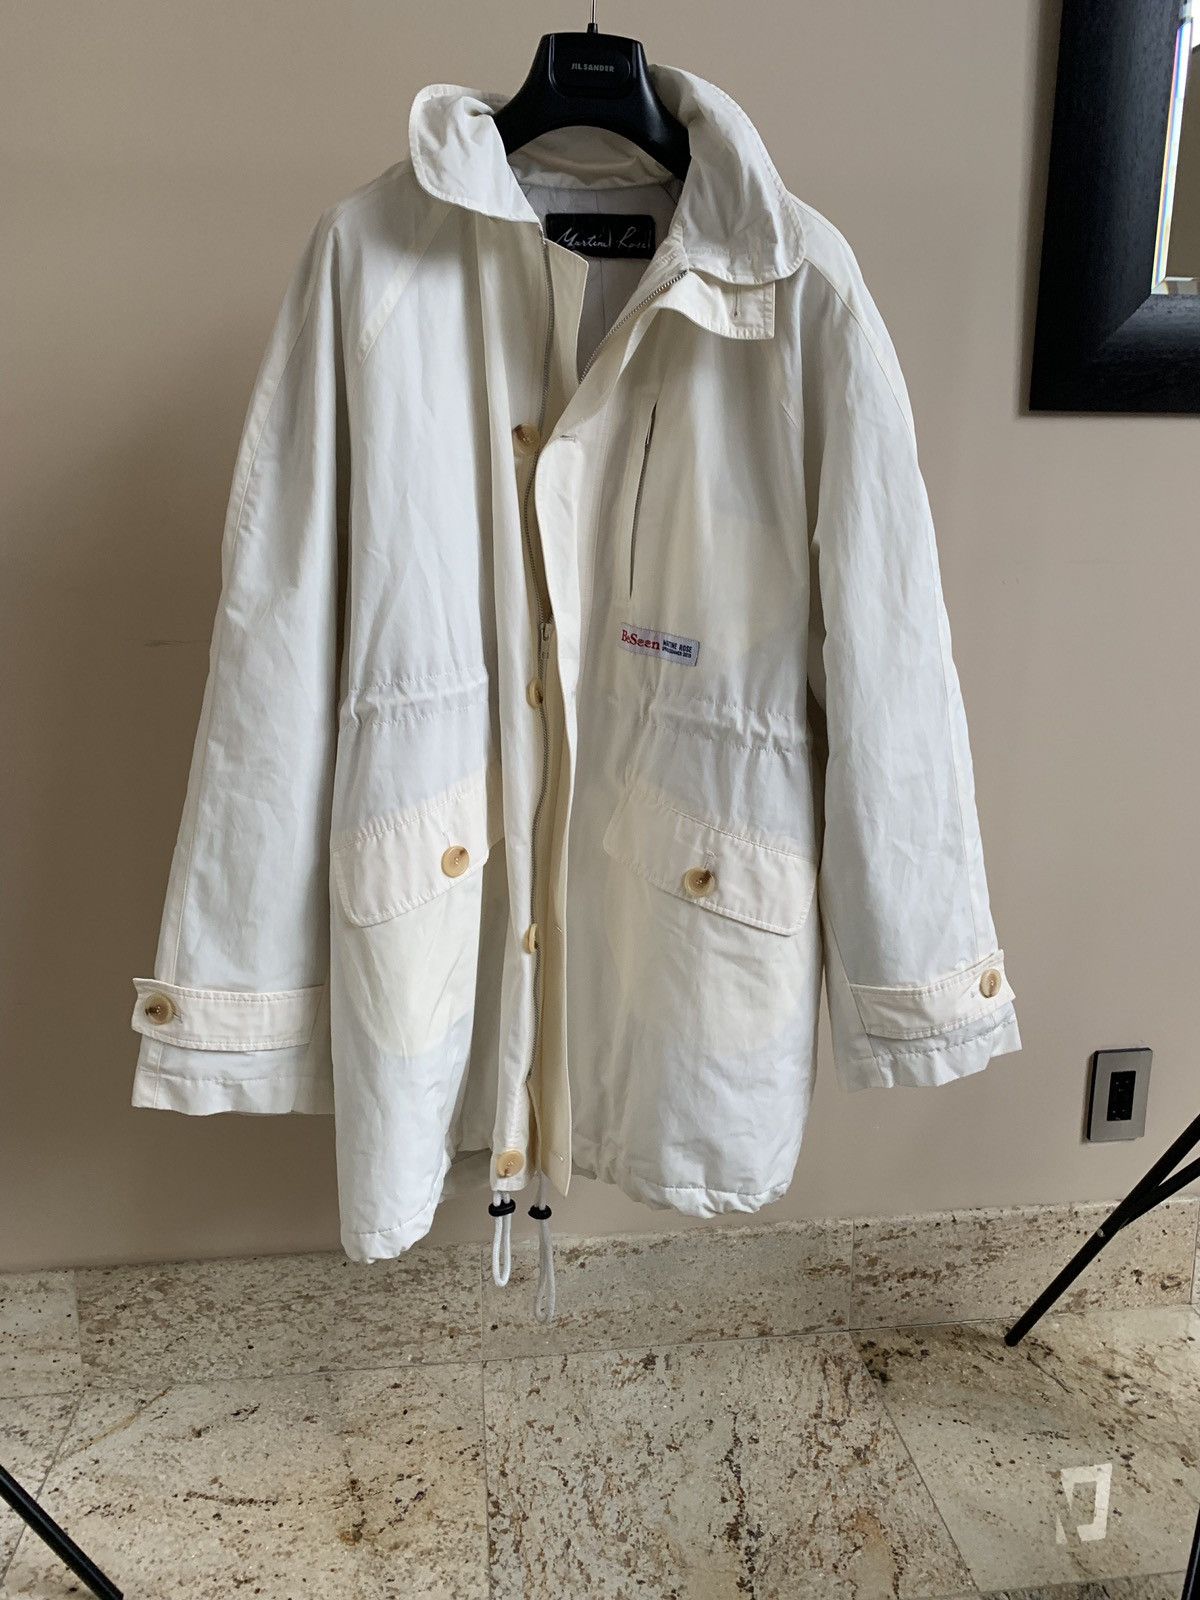 Martine Rose “Be Seen” Parka in Ivory | Grailed